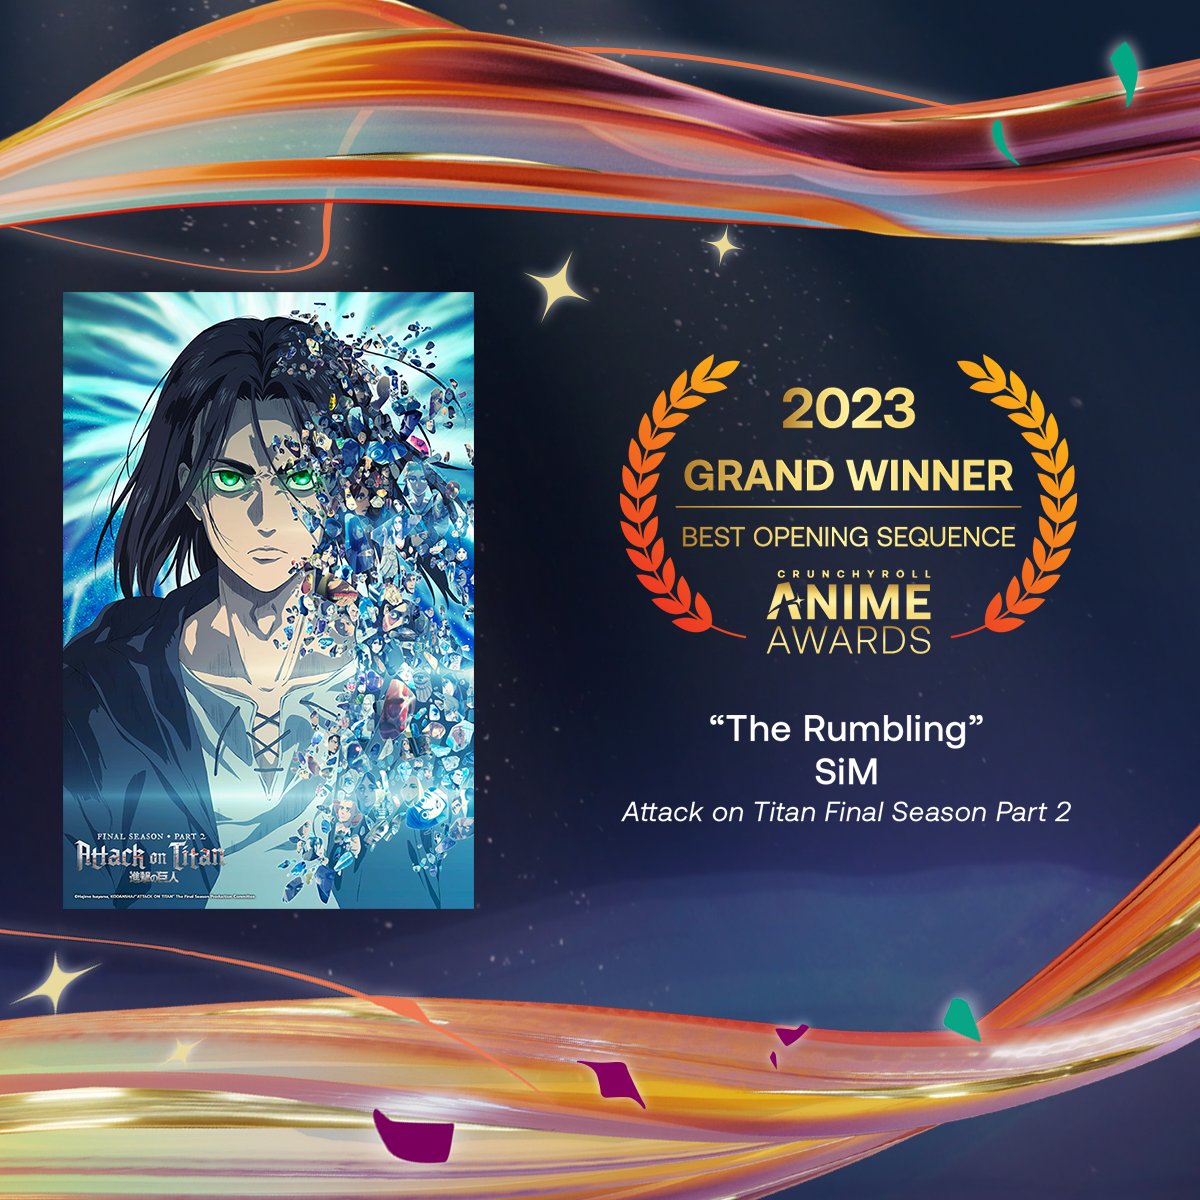 Crunchyroll Announces The Hosts For Anime Awards Ahead Of Live Event In  March 2023